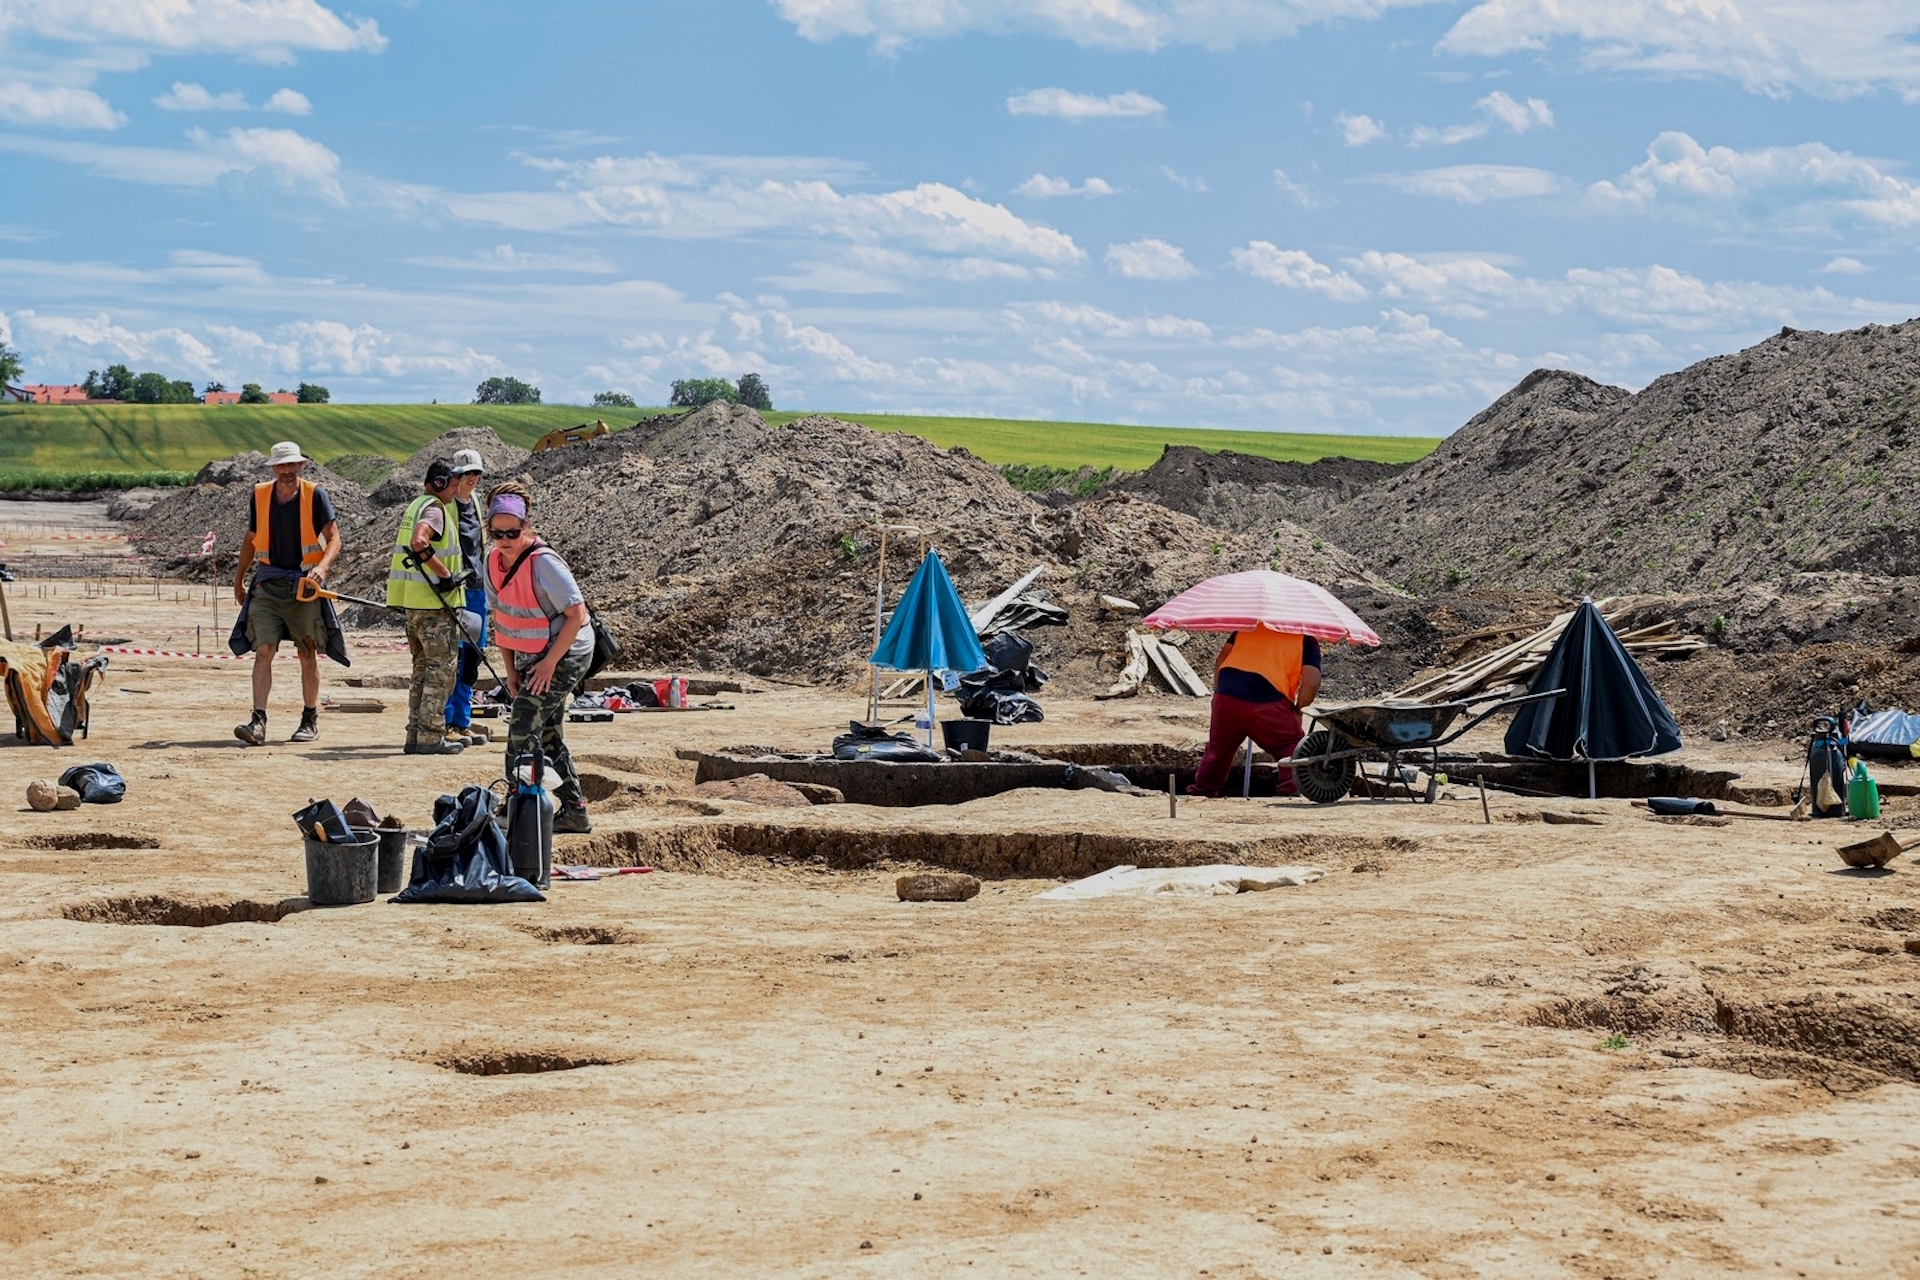 A photo of archaeologists working at the excavation site.